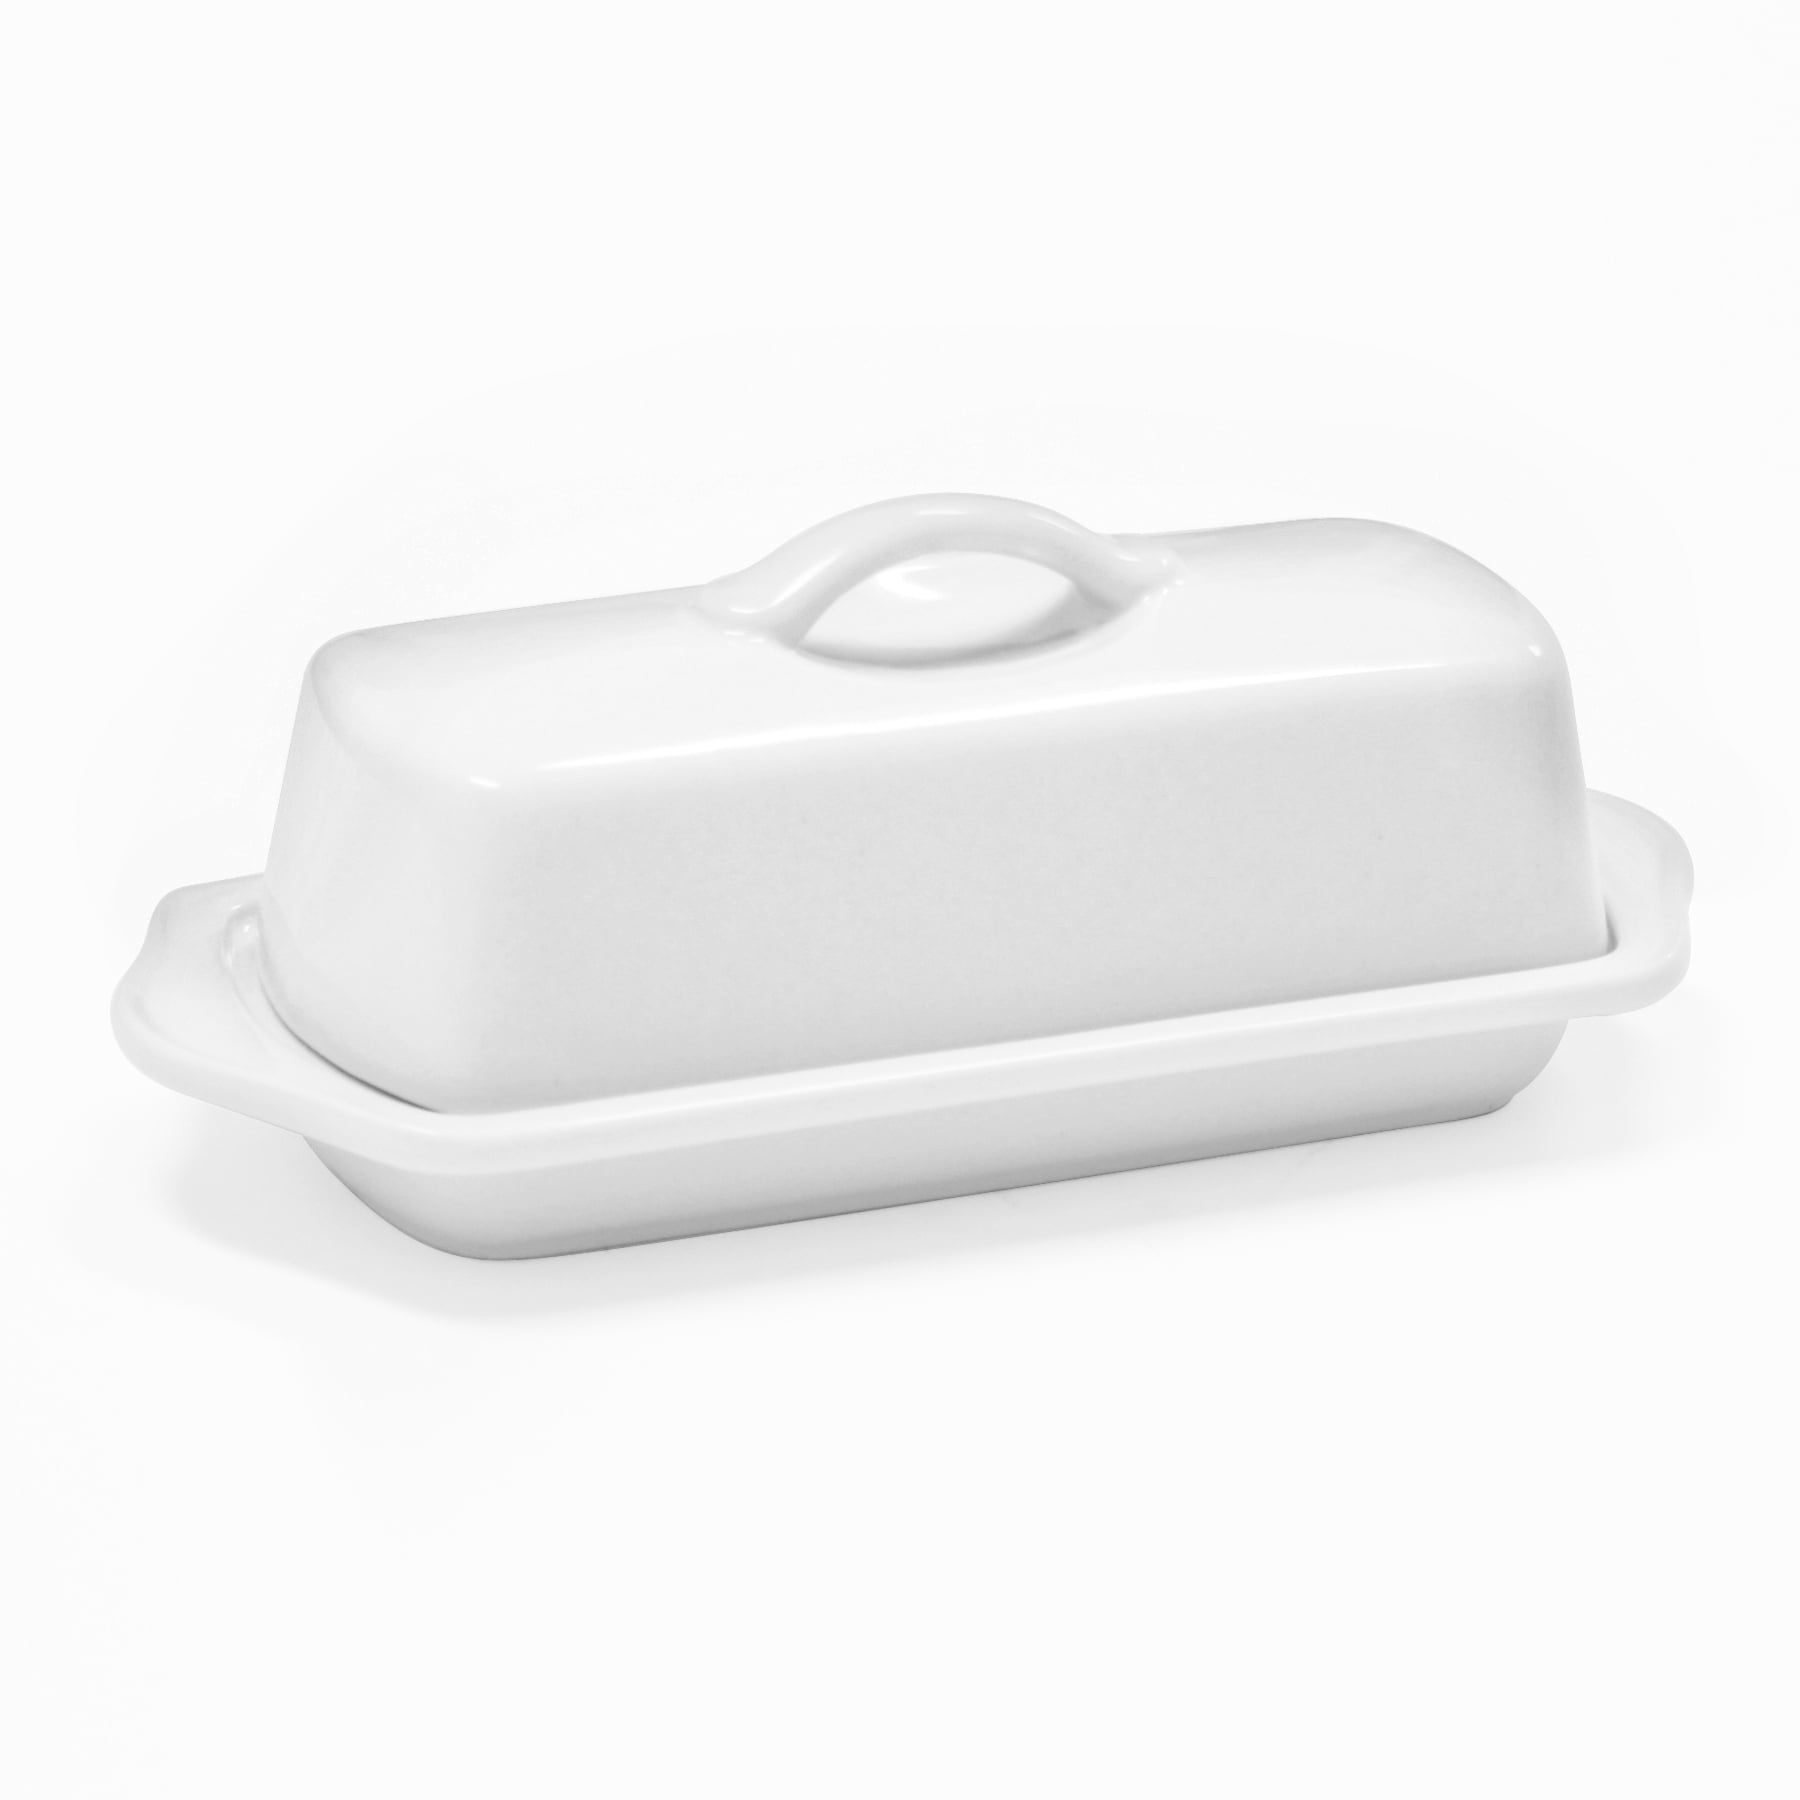 Details about   BIA Cordon Bleu Butter Dish Cover Lid Replacement White 6-1/2" Long